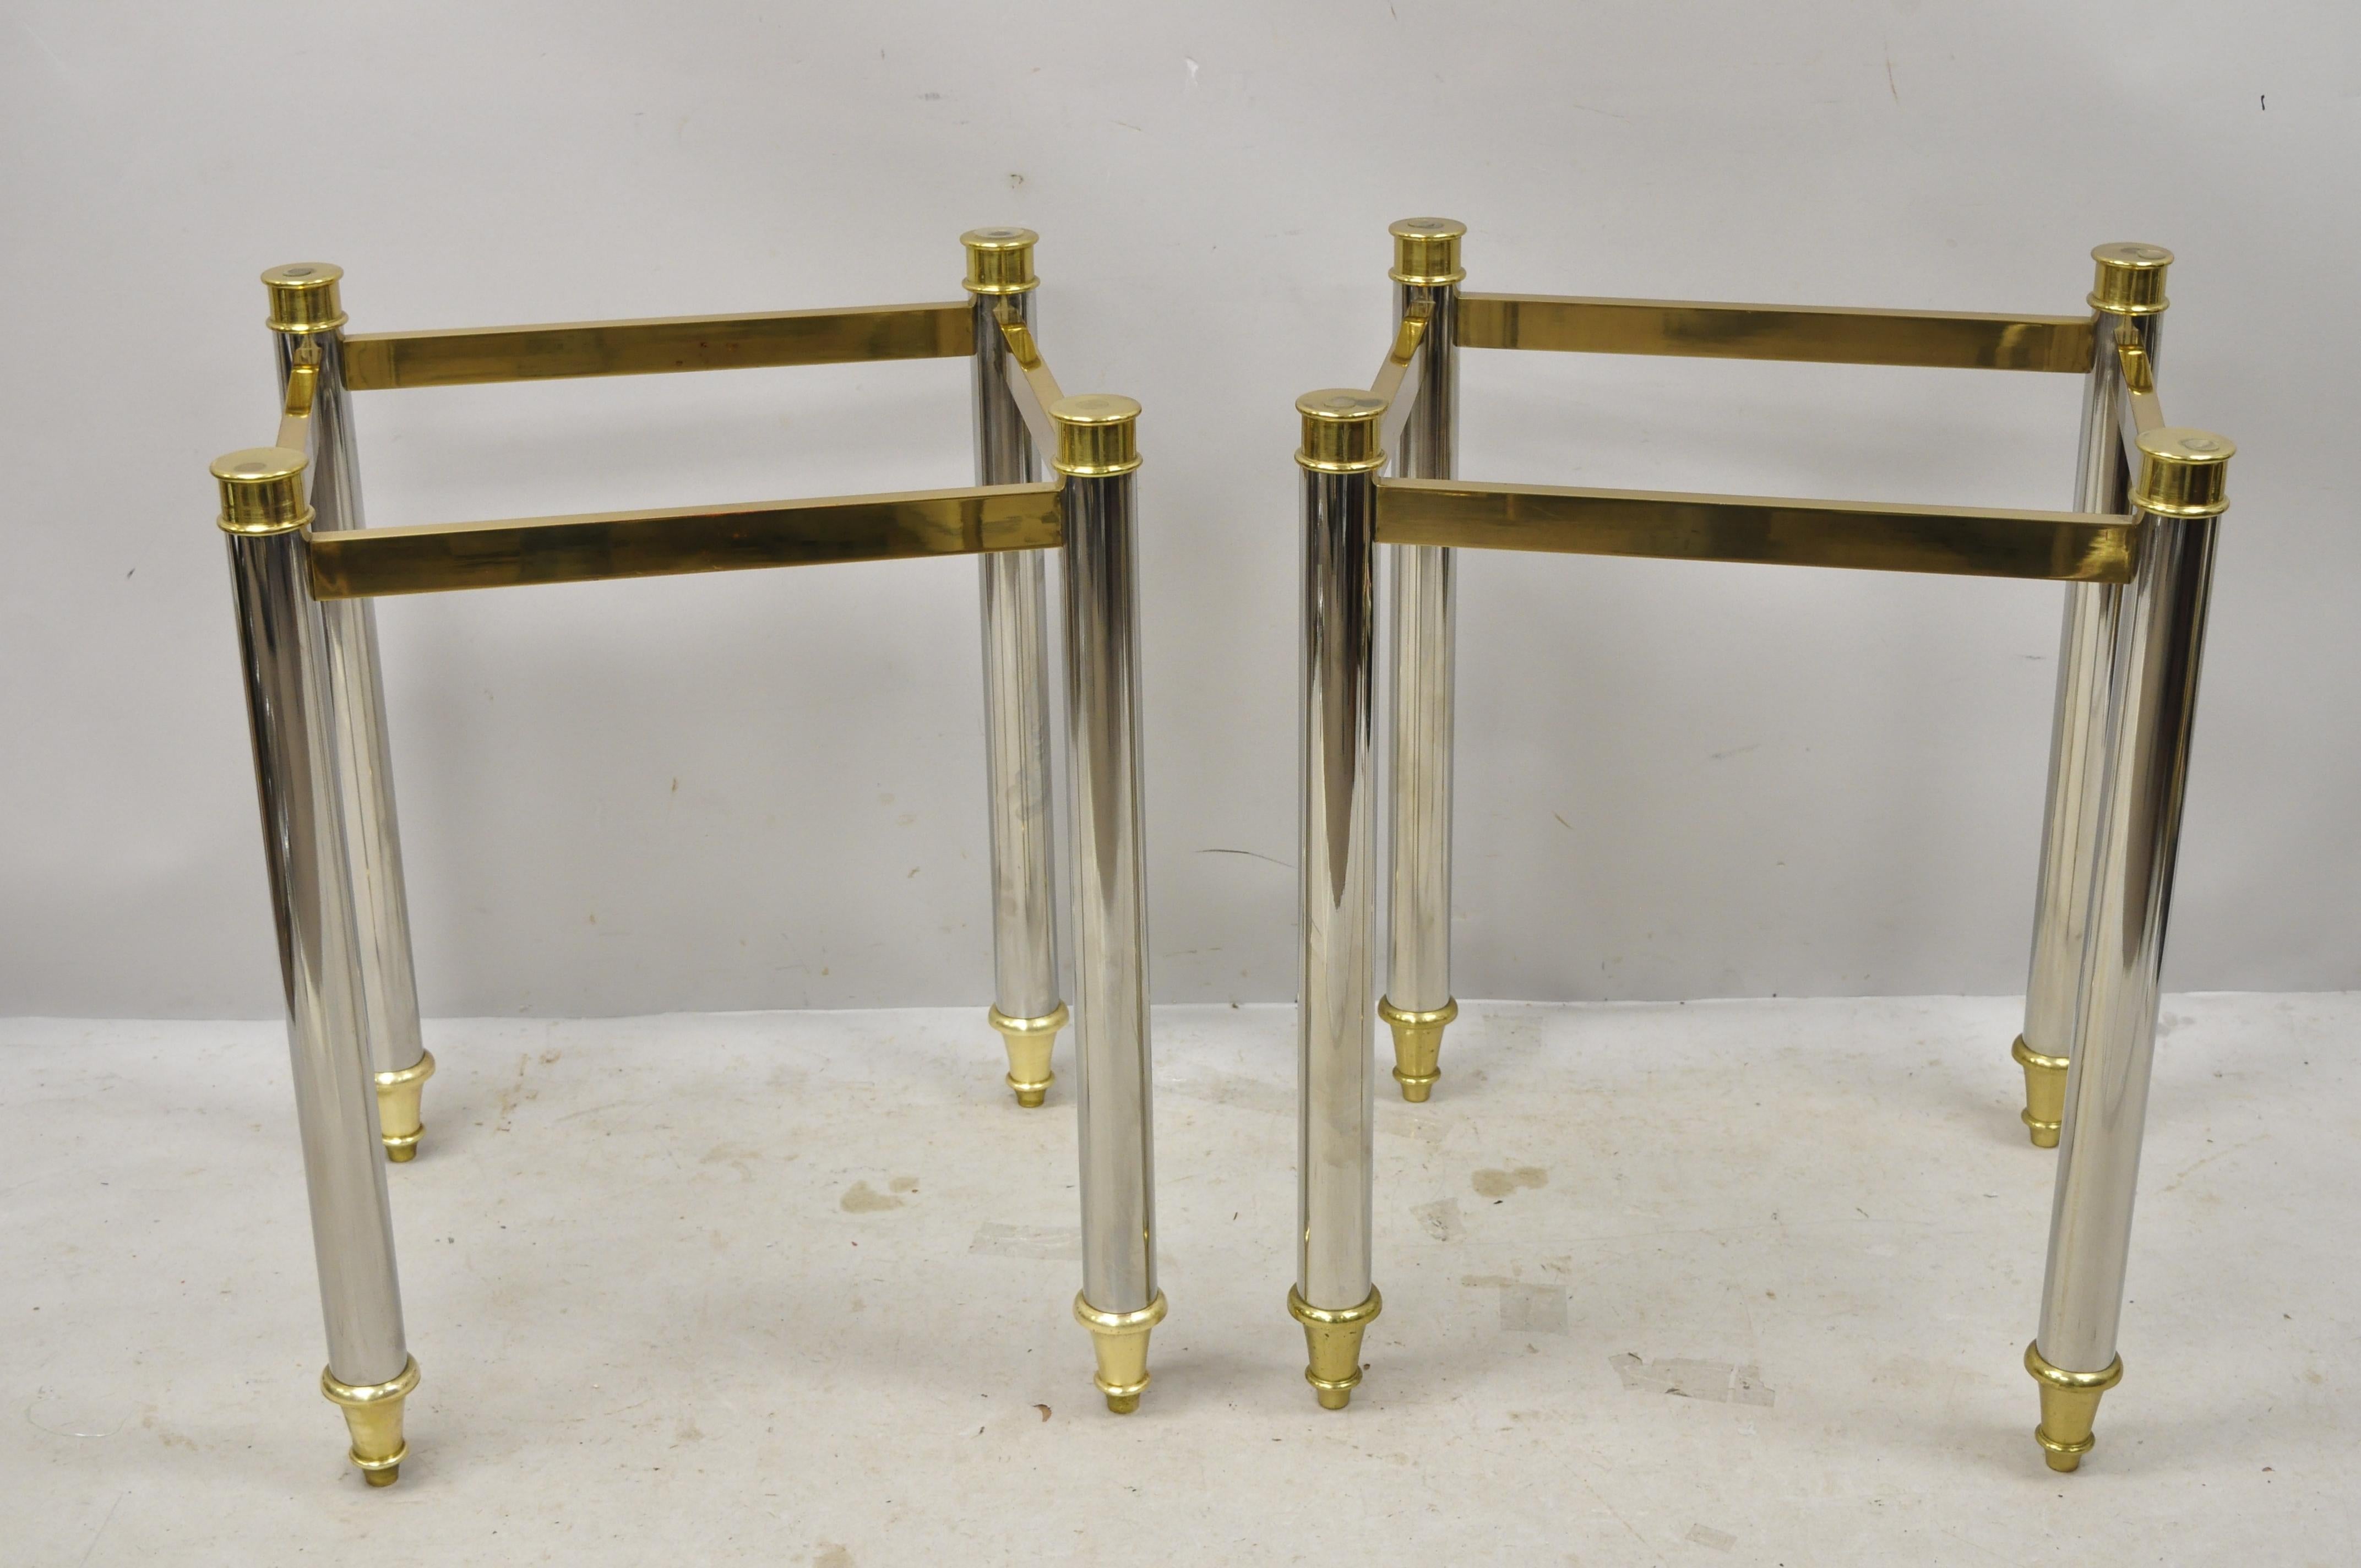 Maison Jansen style steel chrome and brass Italian Hollywood Regency end tables - a pair. Item features heavy chrome-plated steel frame, brass accents and feet, no glass tops, circa mid-late 20th century. Measurements: 28.25